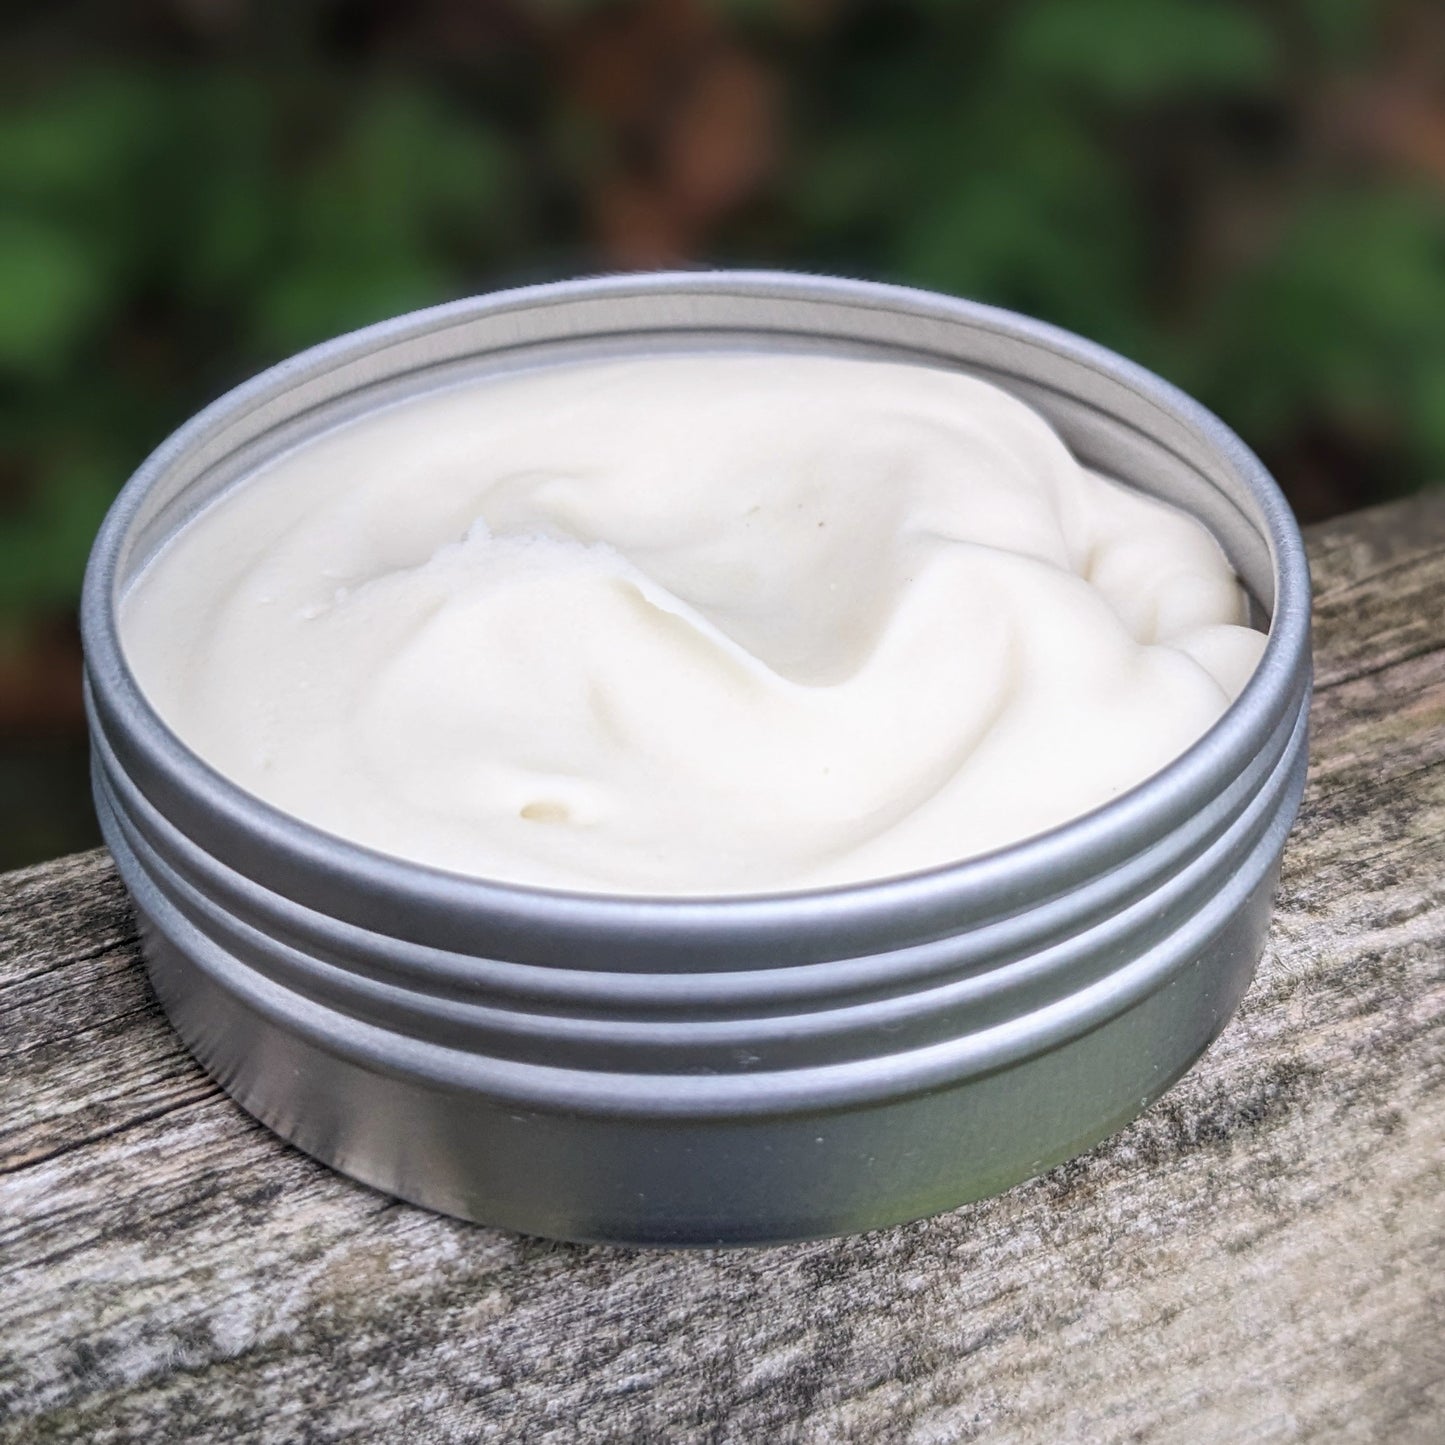 Natural Deodorant - Crafted with Clean Ingredients for Healthy Pits